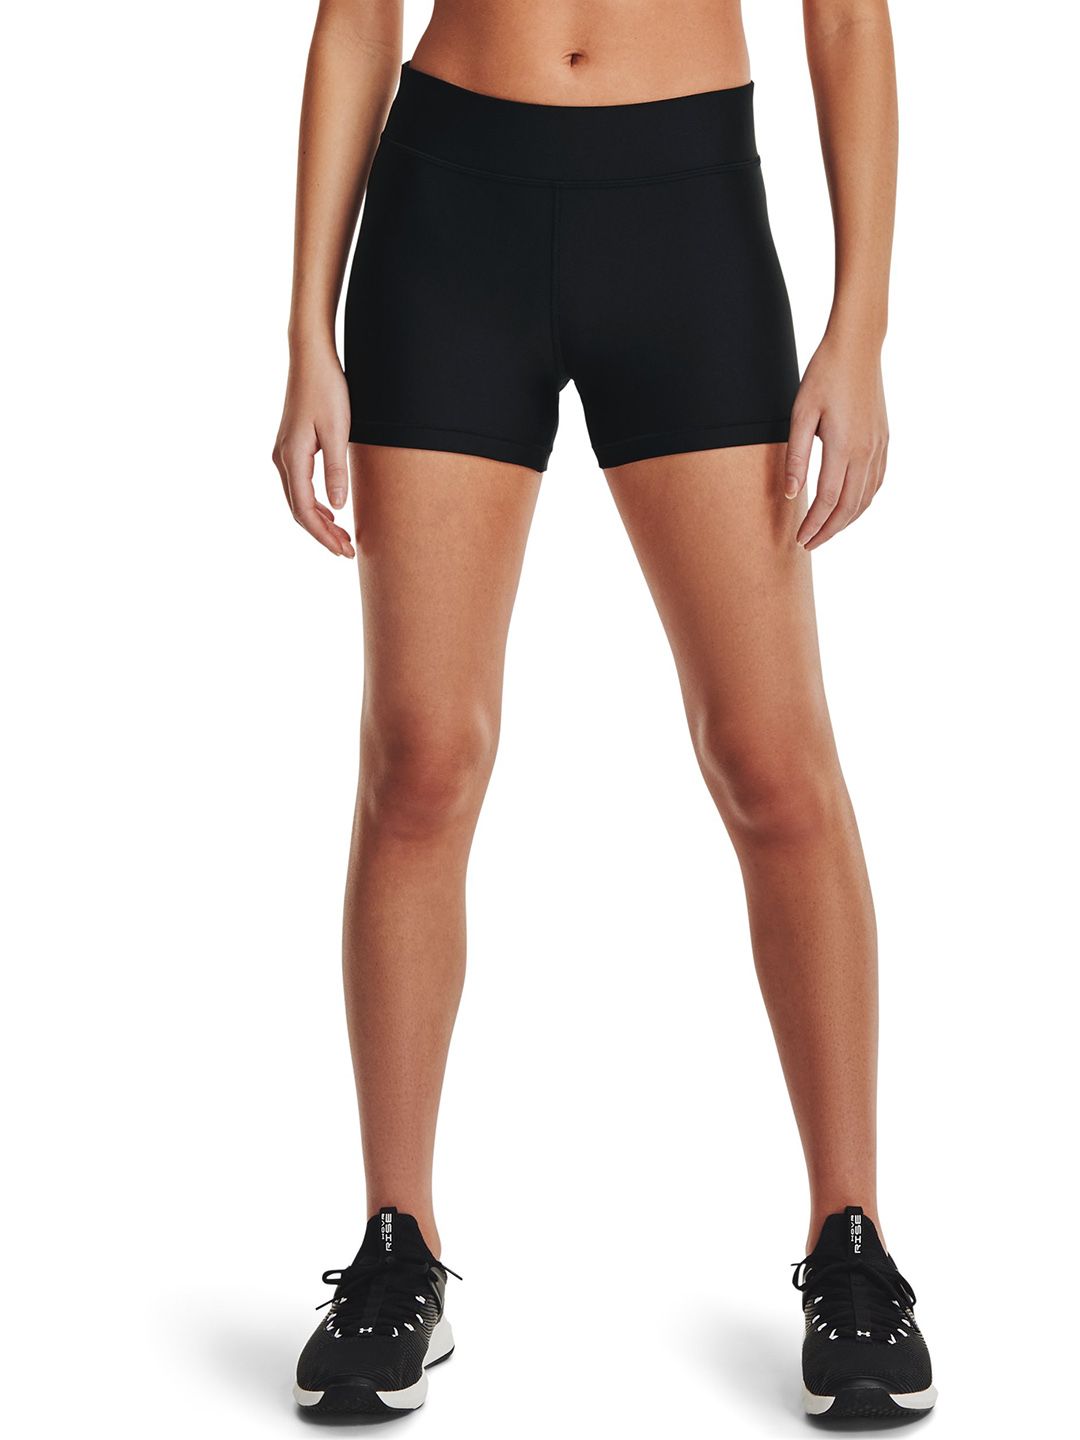 UNDER ARMOUR Women Black HeatGear Skinny Fit Gym Sports Shorts Price in India